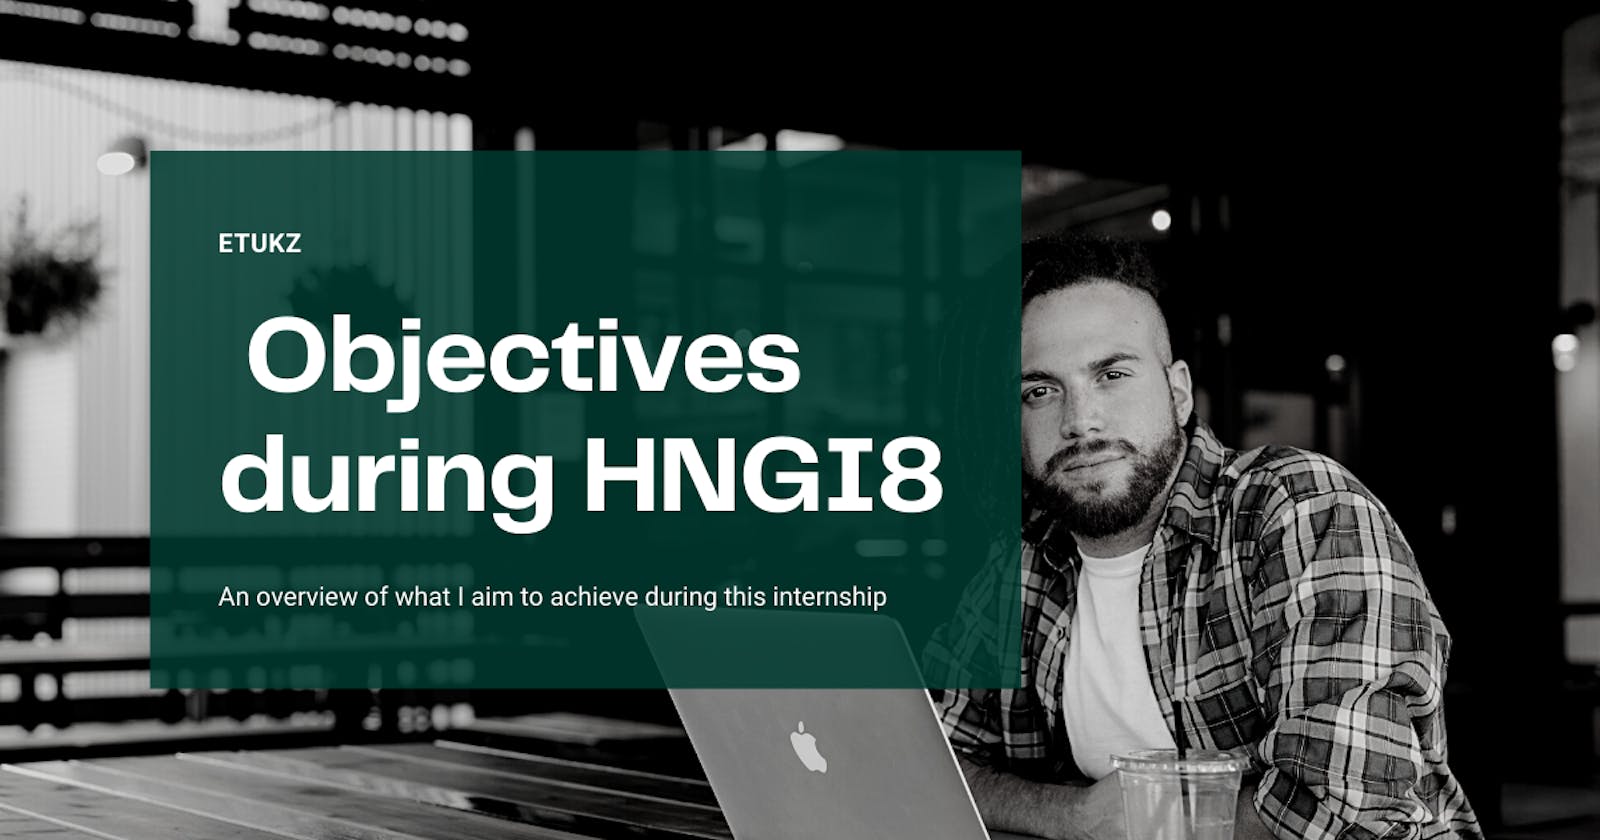 Objectives during HNGI8